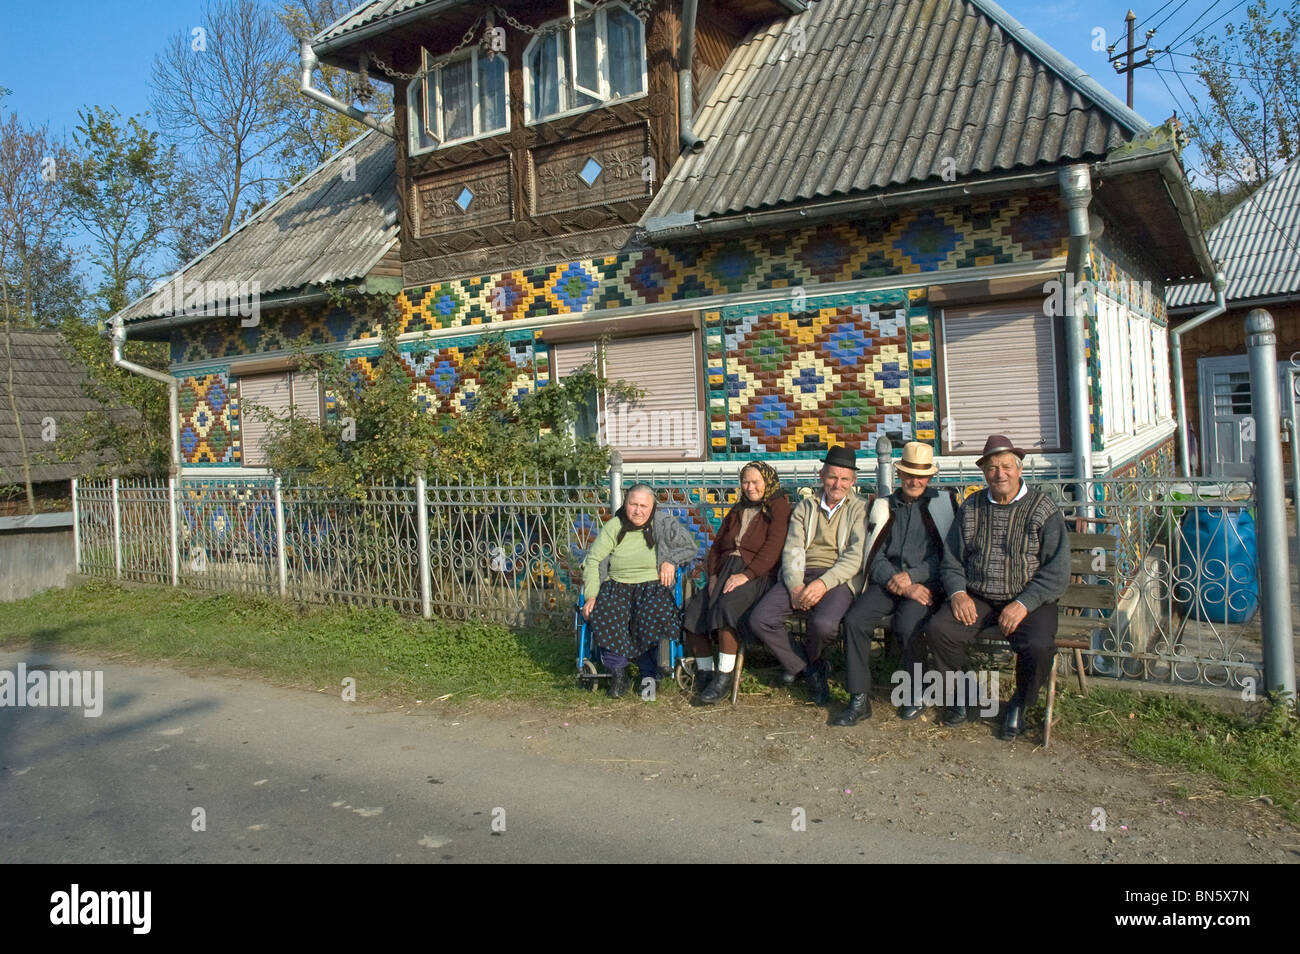 Elderly Romanians relax in the sushine outside in a  colourfully decorated village house Stock Photo